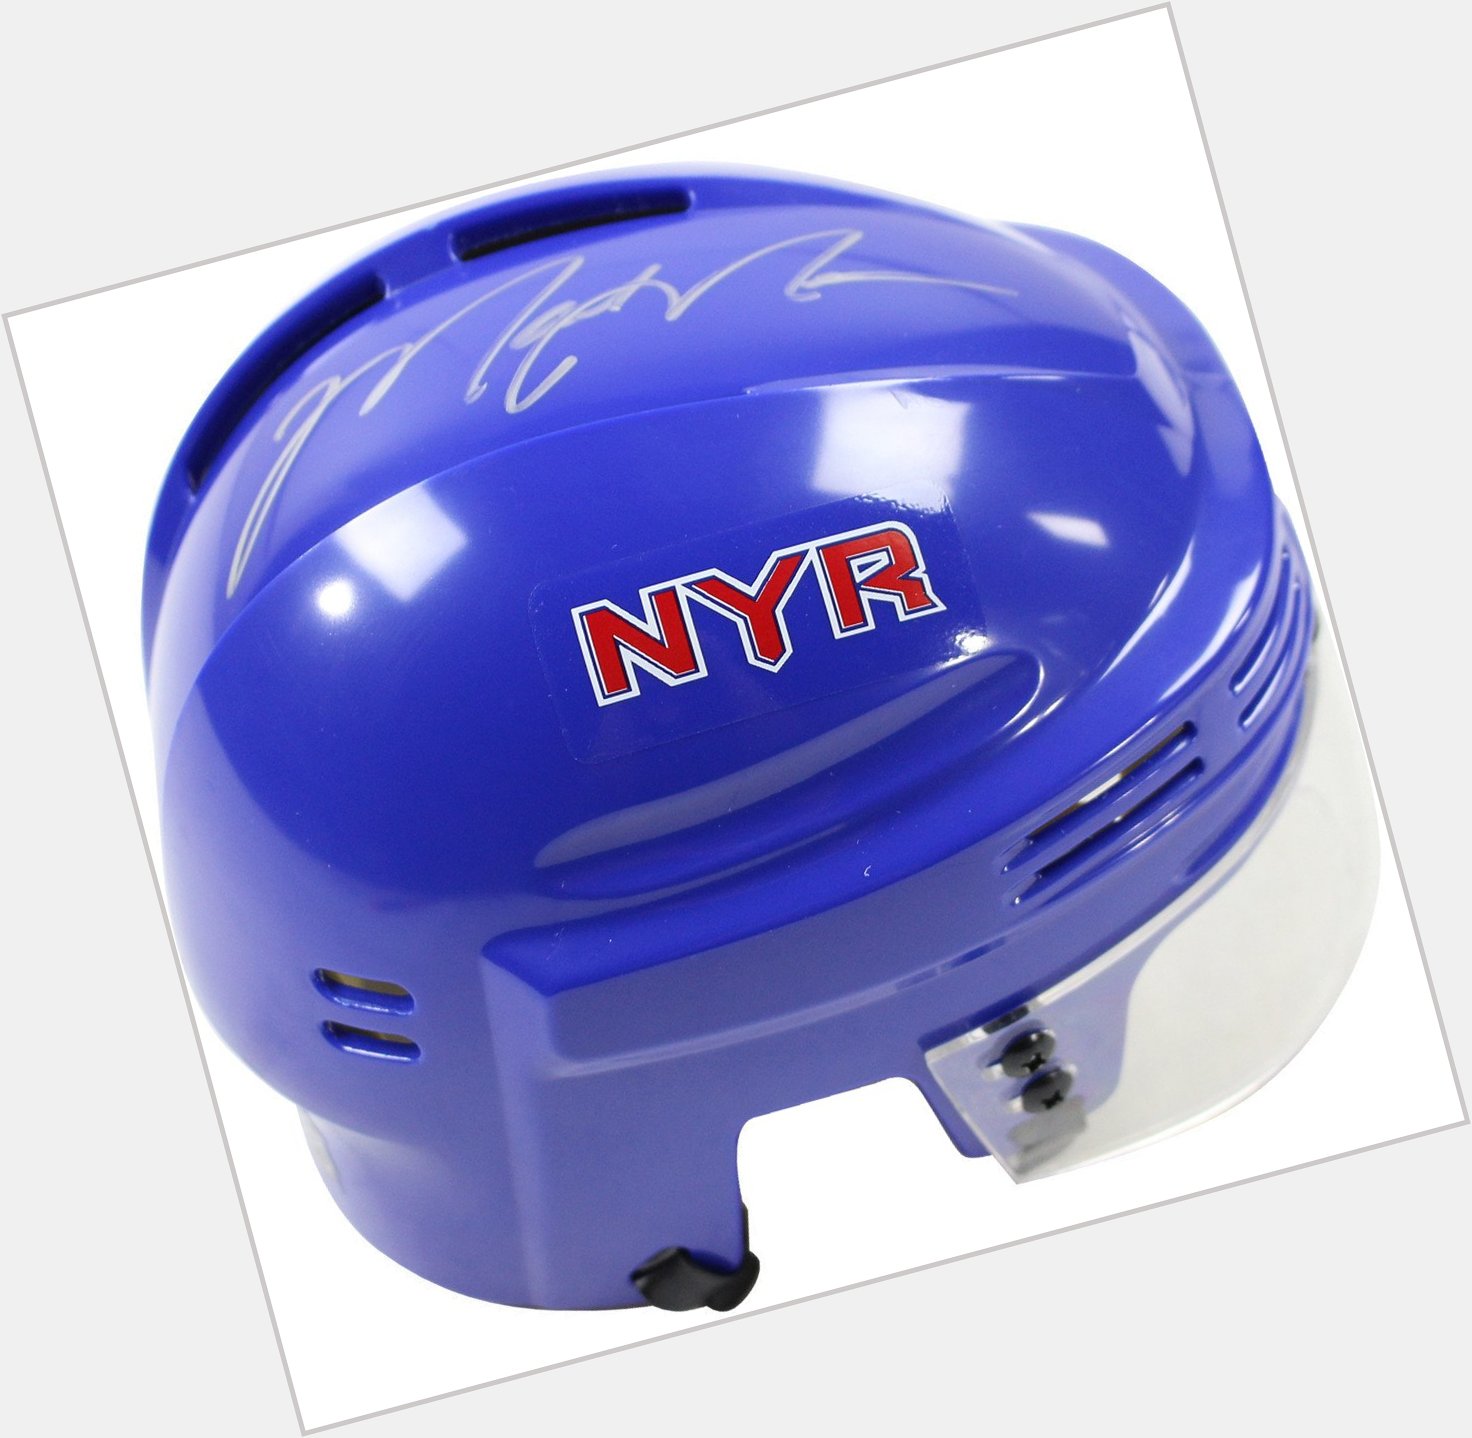 Happy 56th Birthday Mark Messier!

FLASH SALE on Messier signed mini helmets for $111 (516) 739-0580 to purchase 